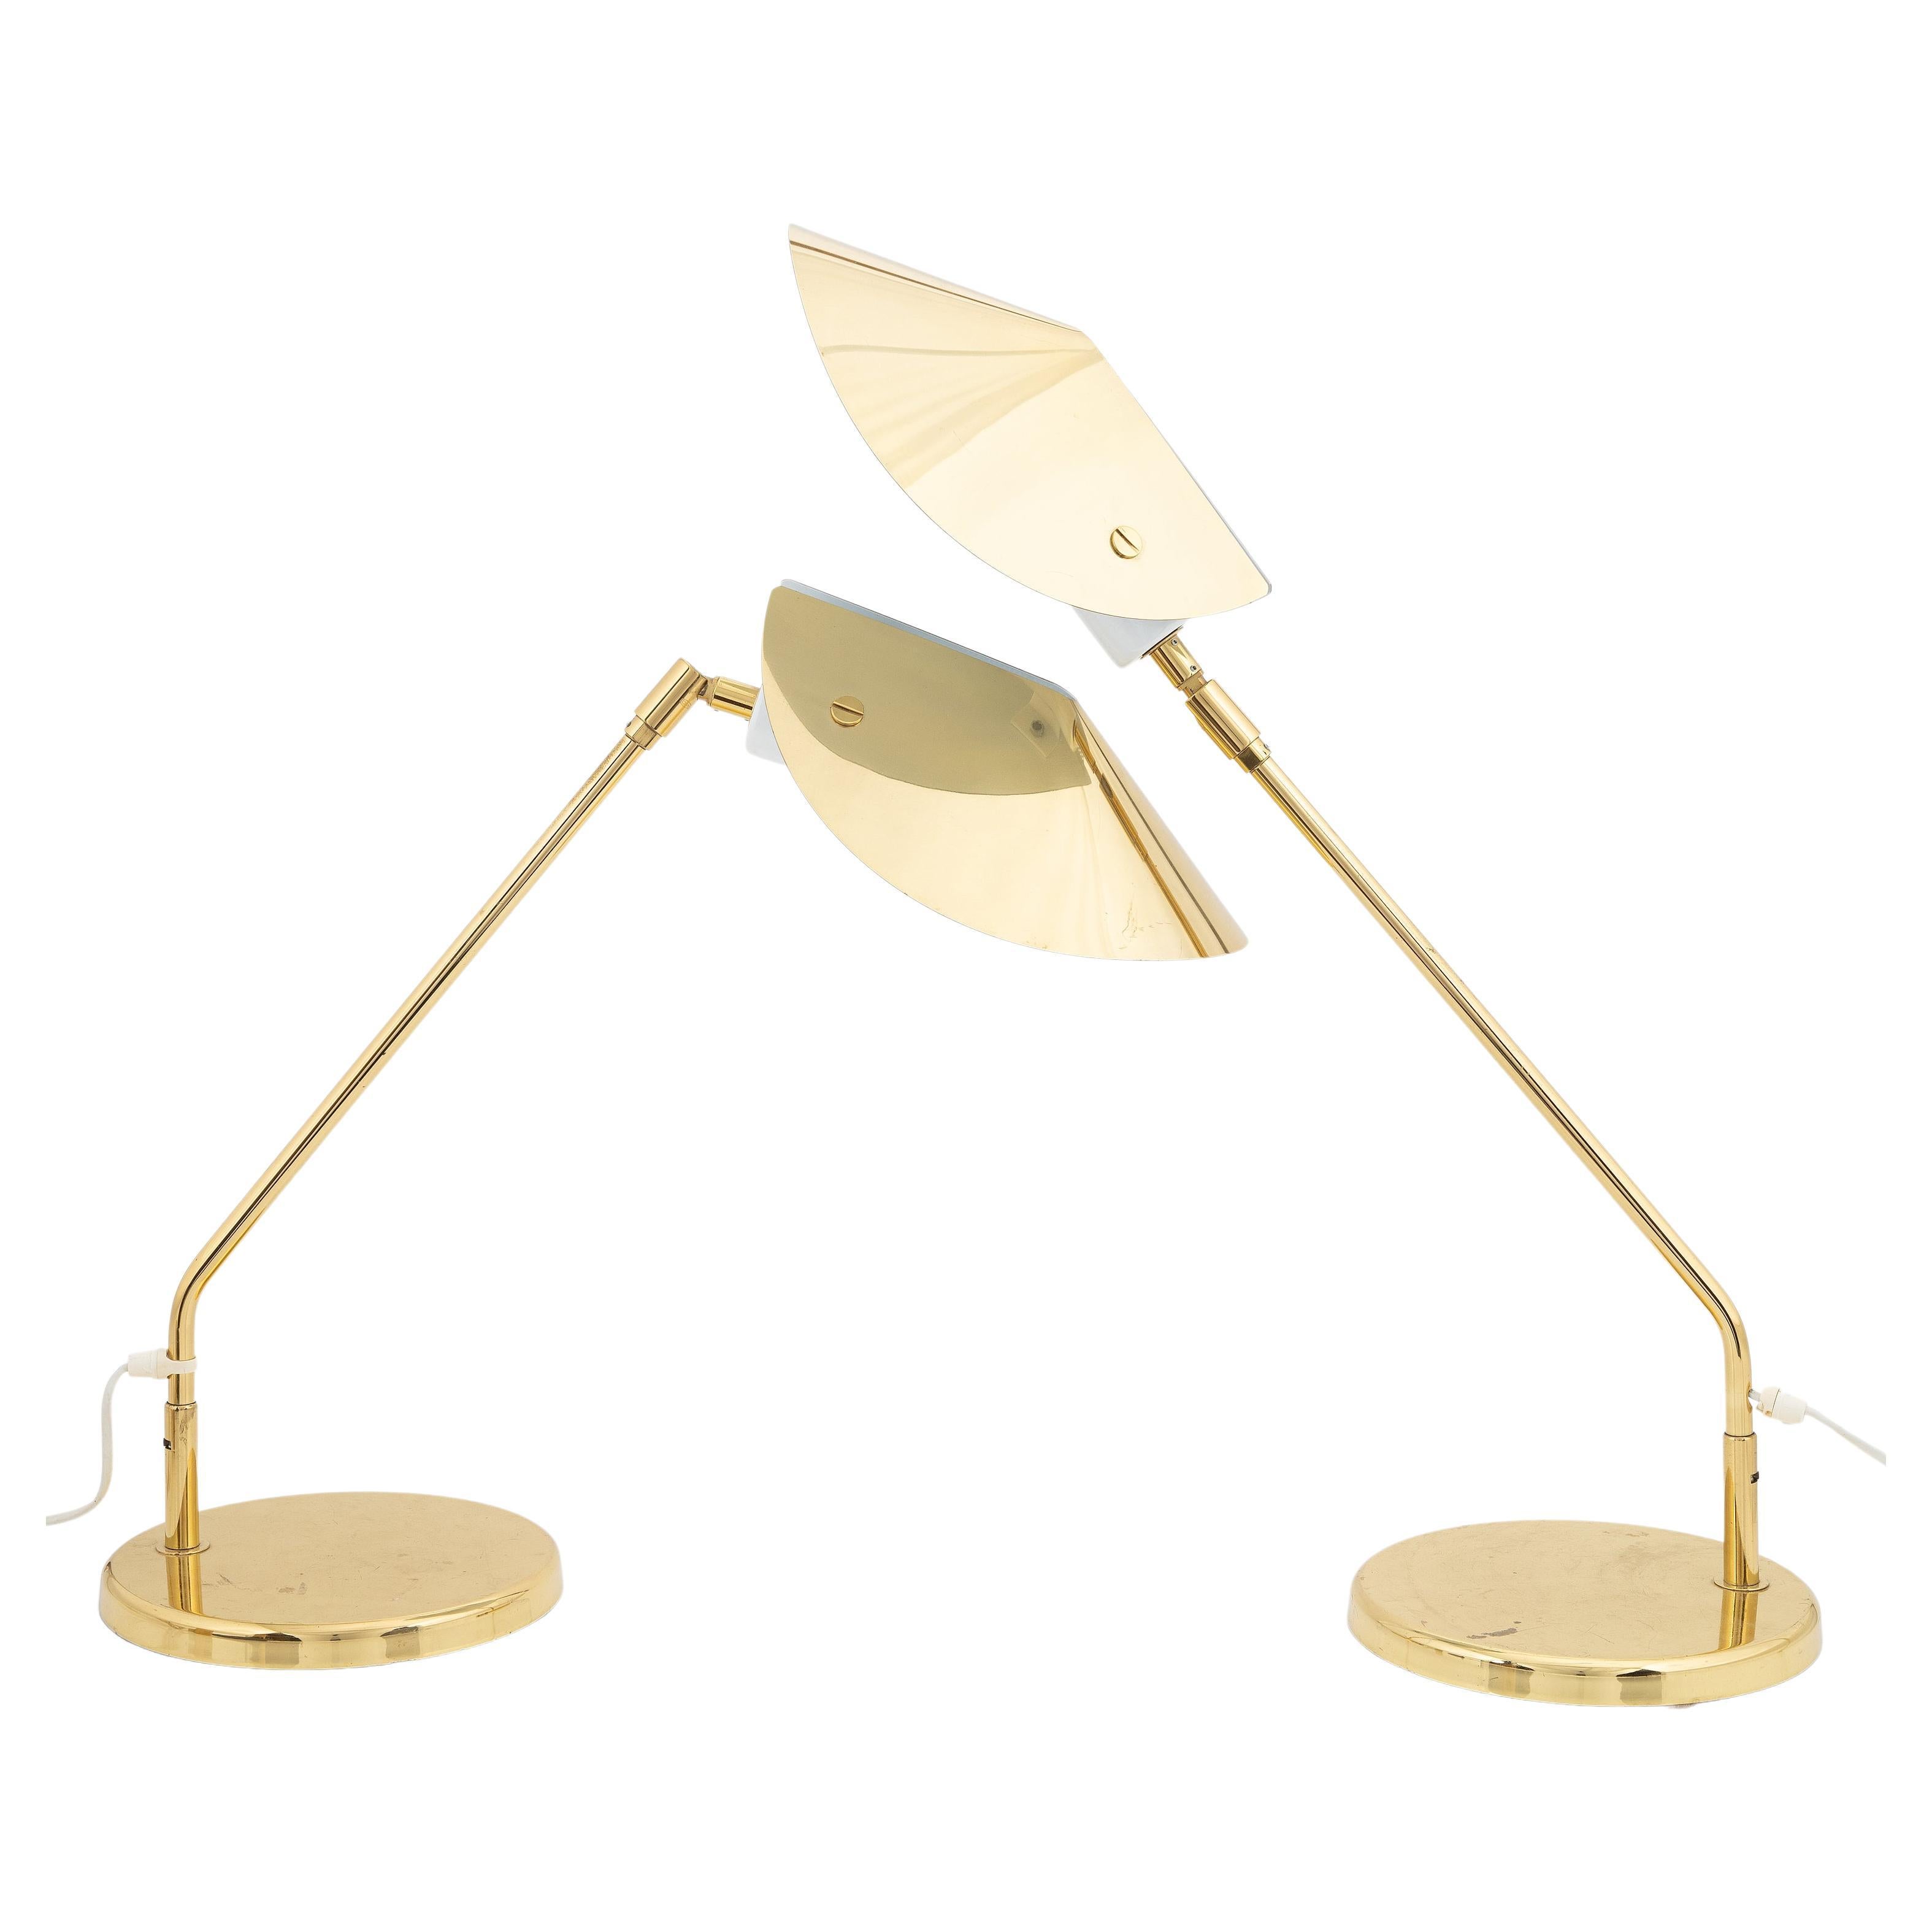 Rare brass table lamp/ desk lamp  from the Swedish brand Aneta. The brass cap is bent around a white metal perforated plate like a monkshood. The curved arm rotates on the heavy foot and the hood can turn and bend up and down.
White performed metal